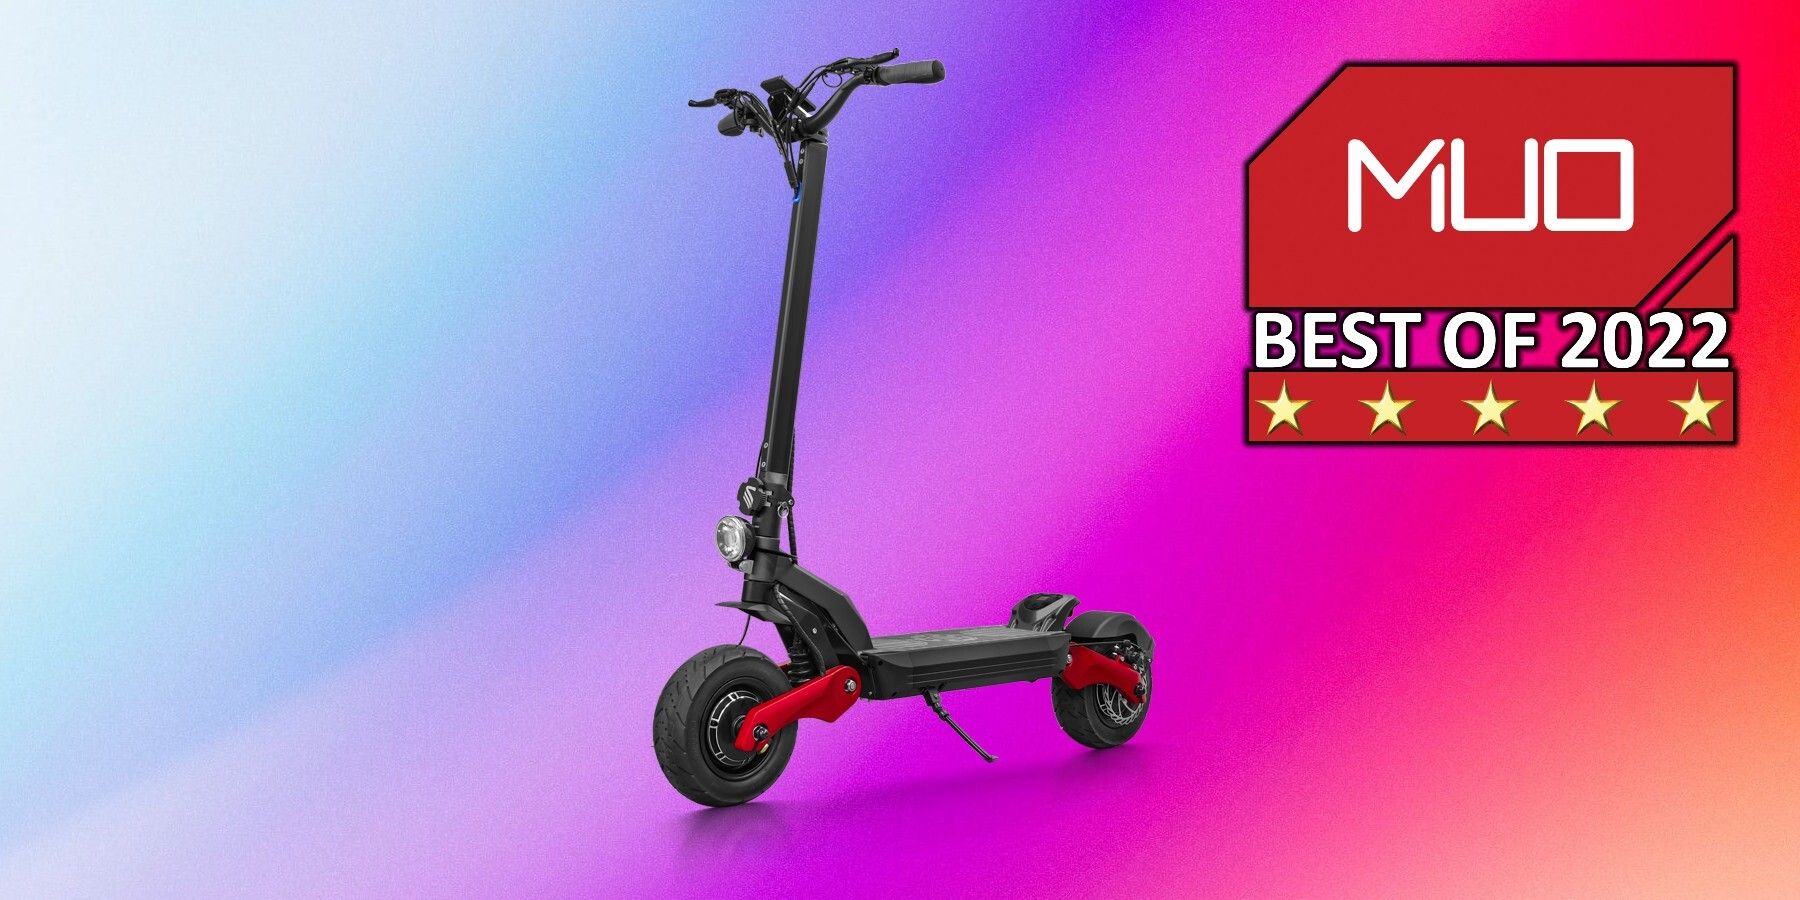 varla eagle one pro electric scooter with award logo